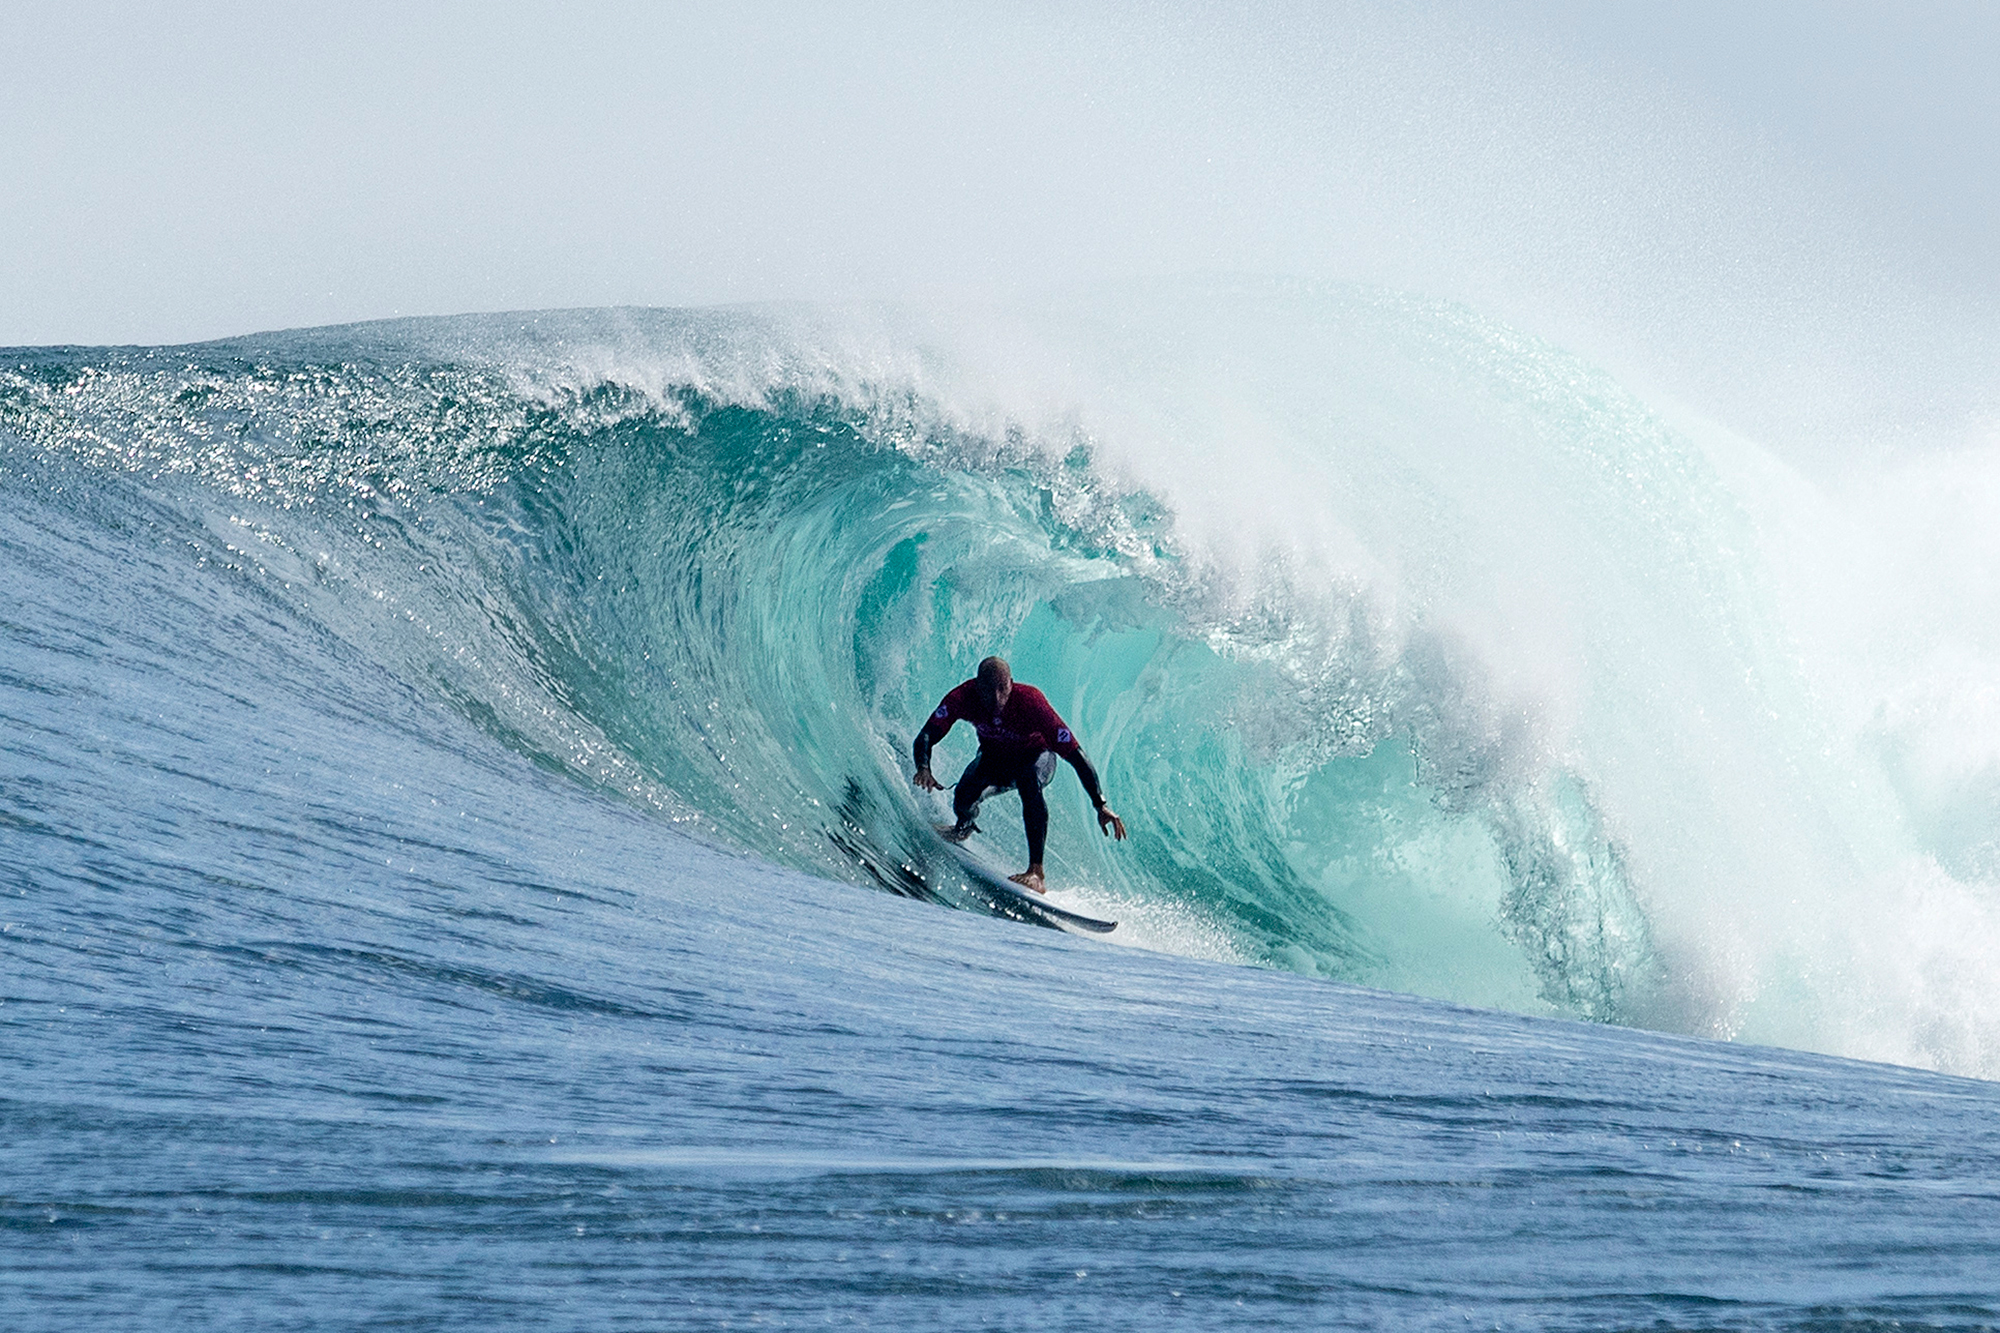 Previewing the Margaret River Pro